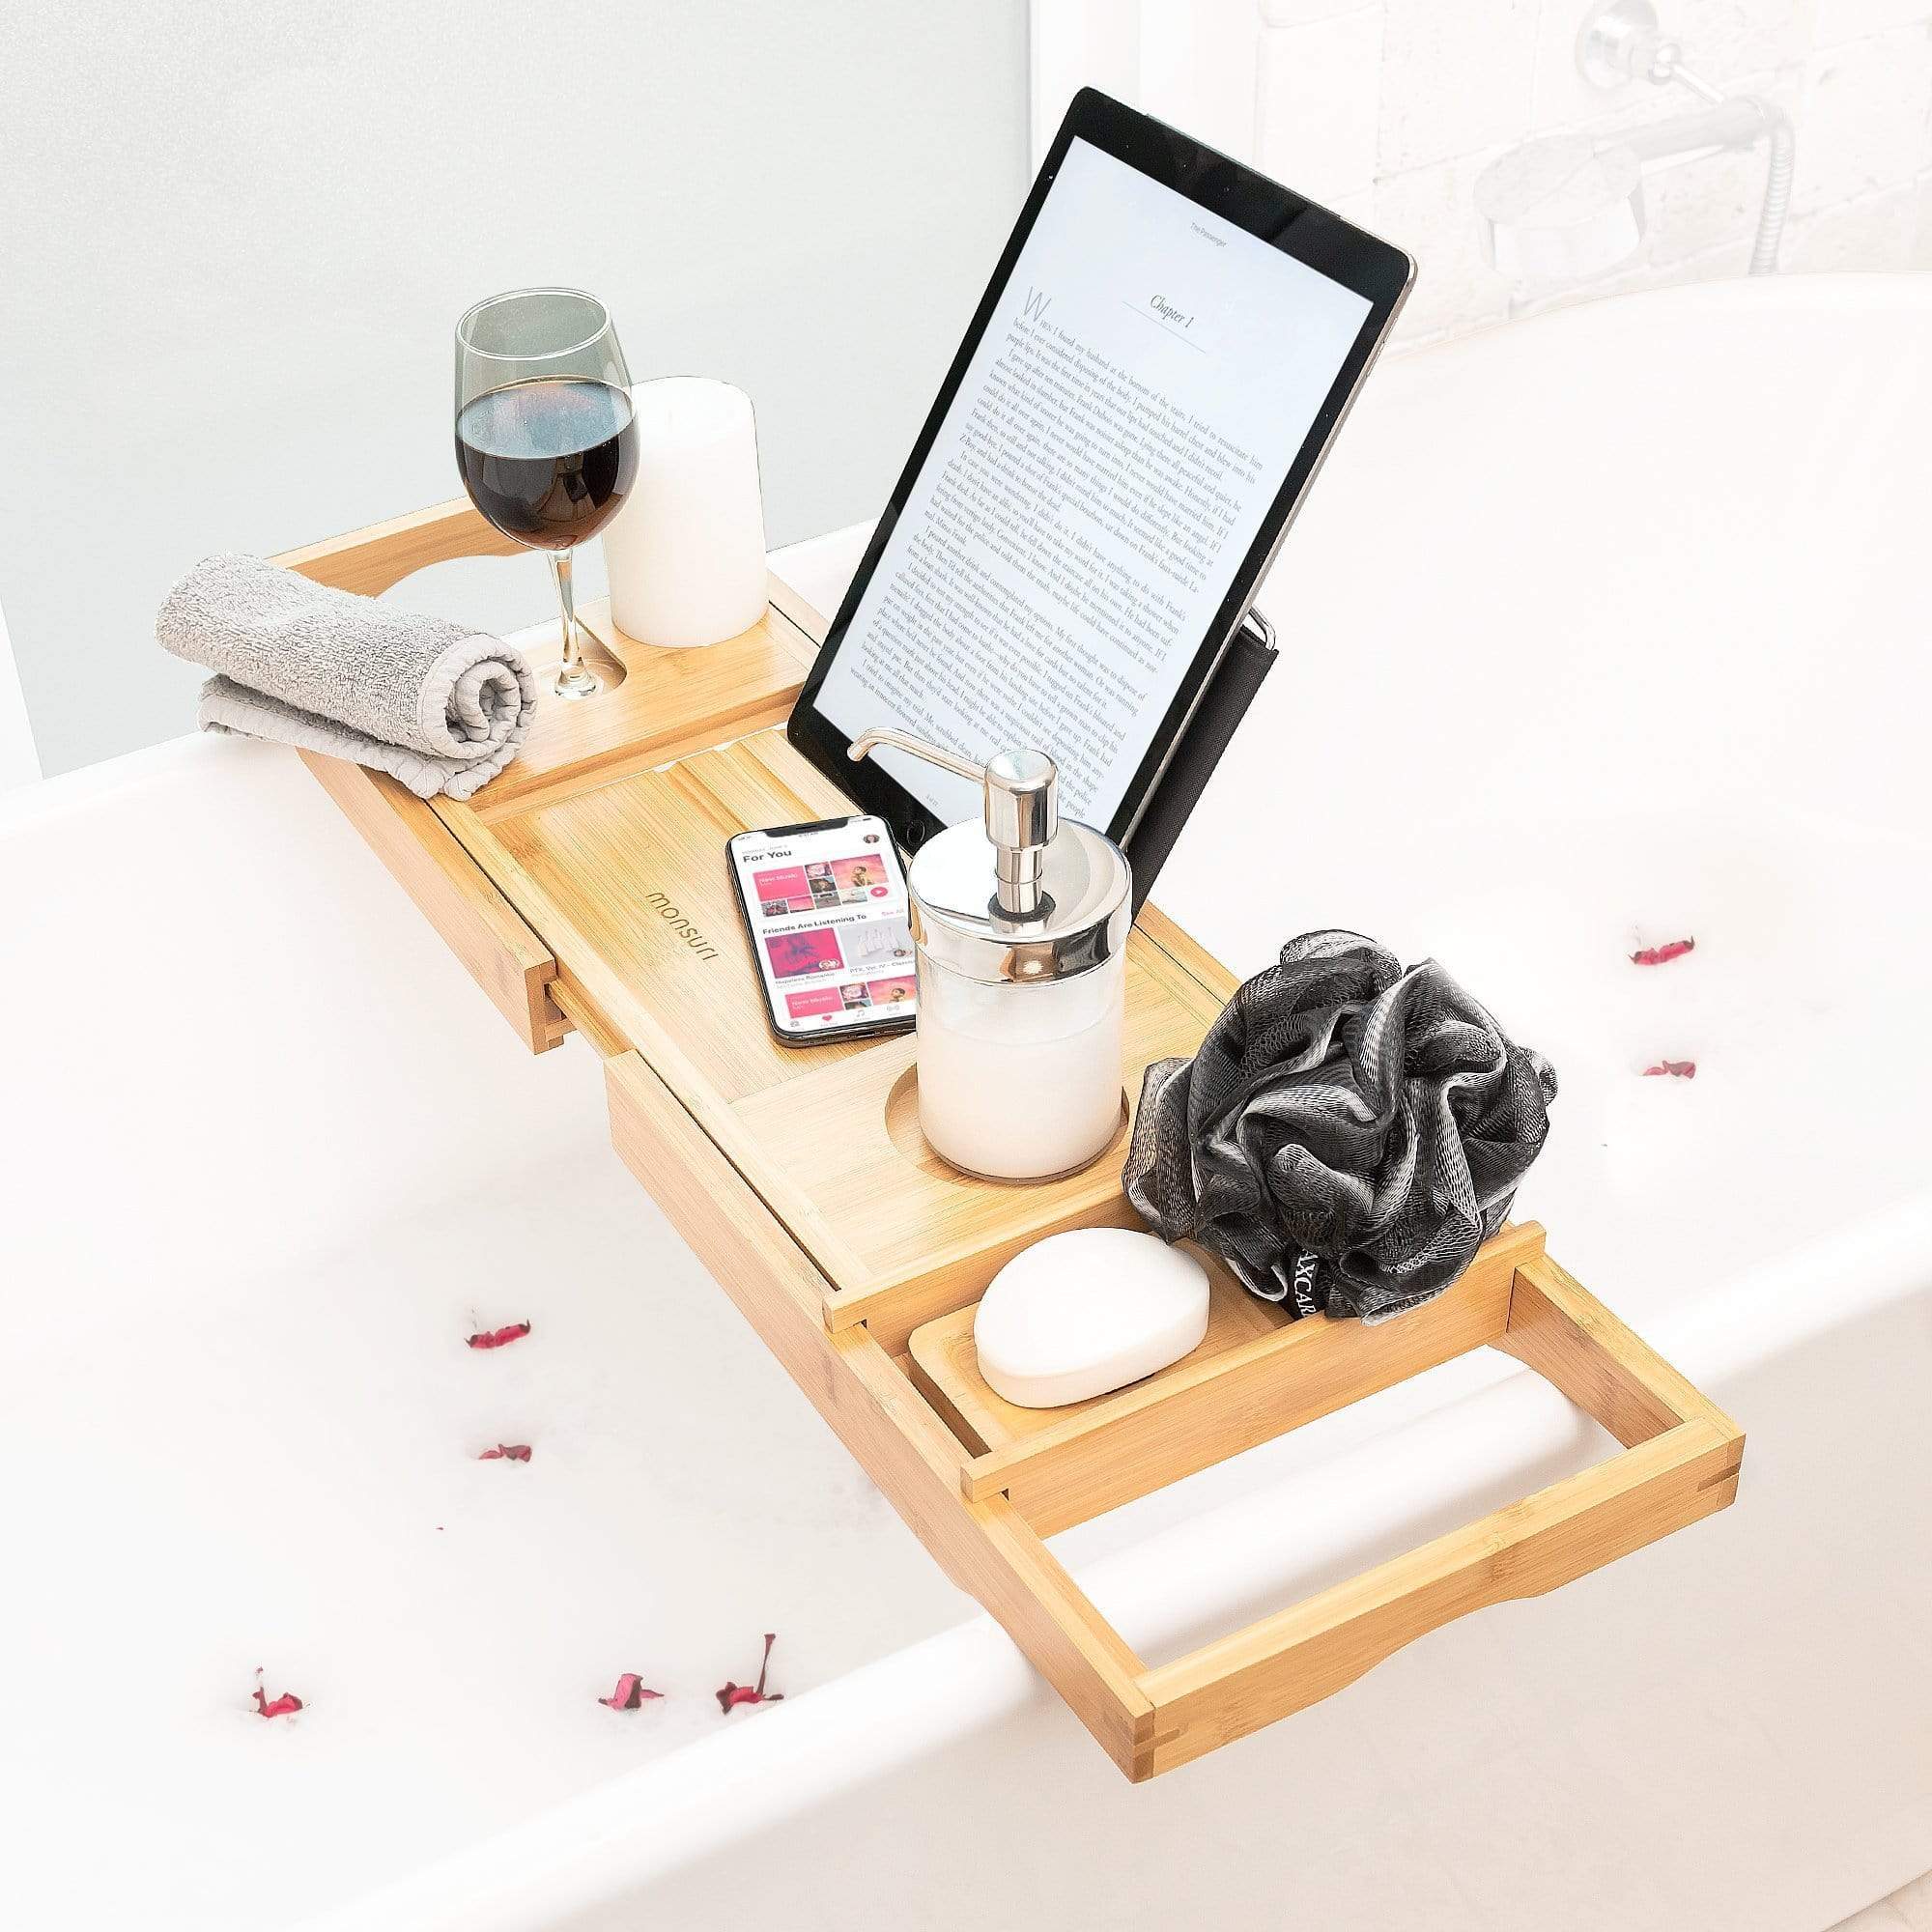 VIVOHOME Expandable 43 inch Bamboo Bathtub Caddy Tray in Natural with Holders, Soap Tray, Wine Glass Slot